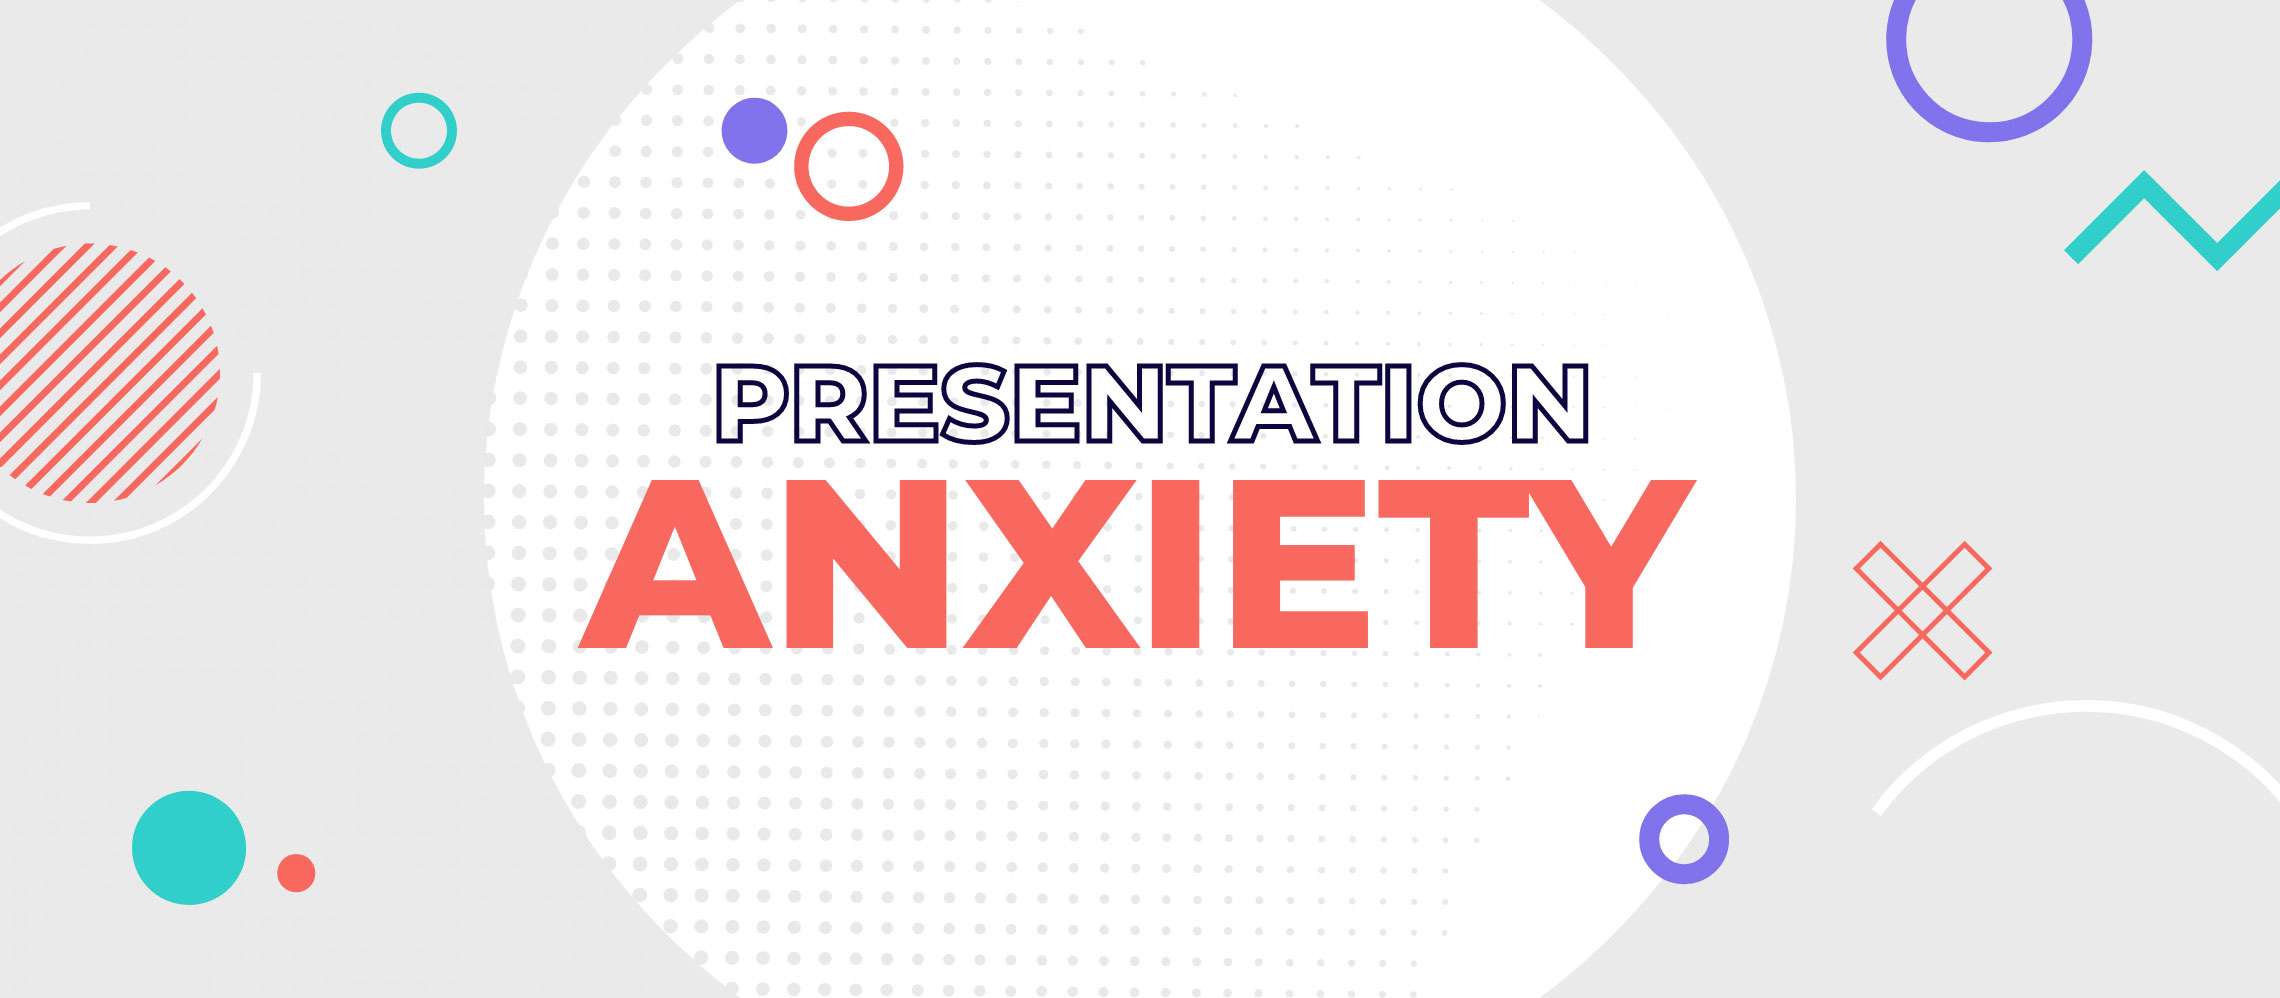 The power to overcome presentation anxiety is already within you.